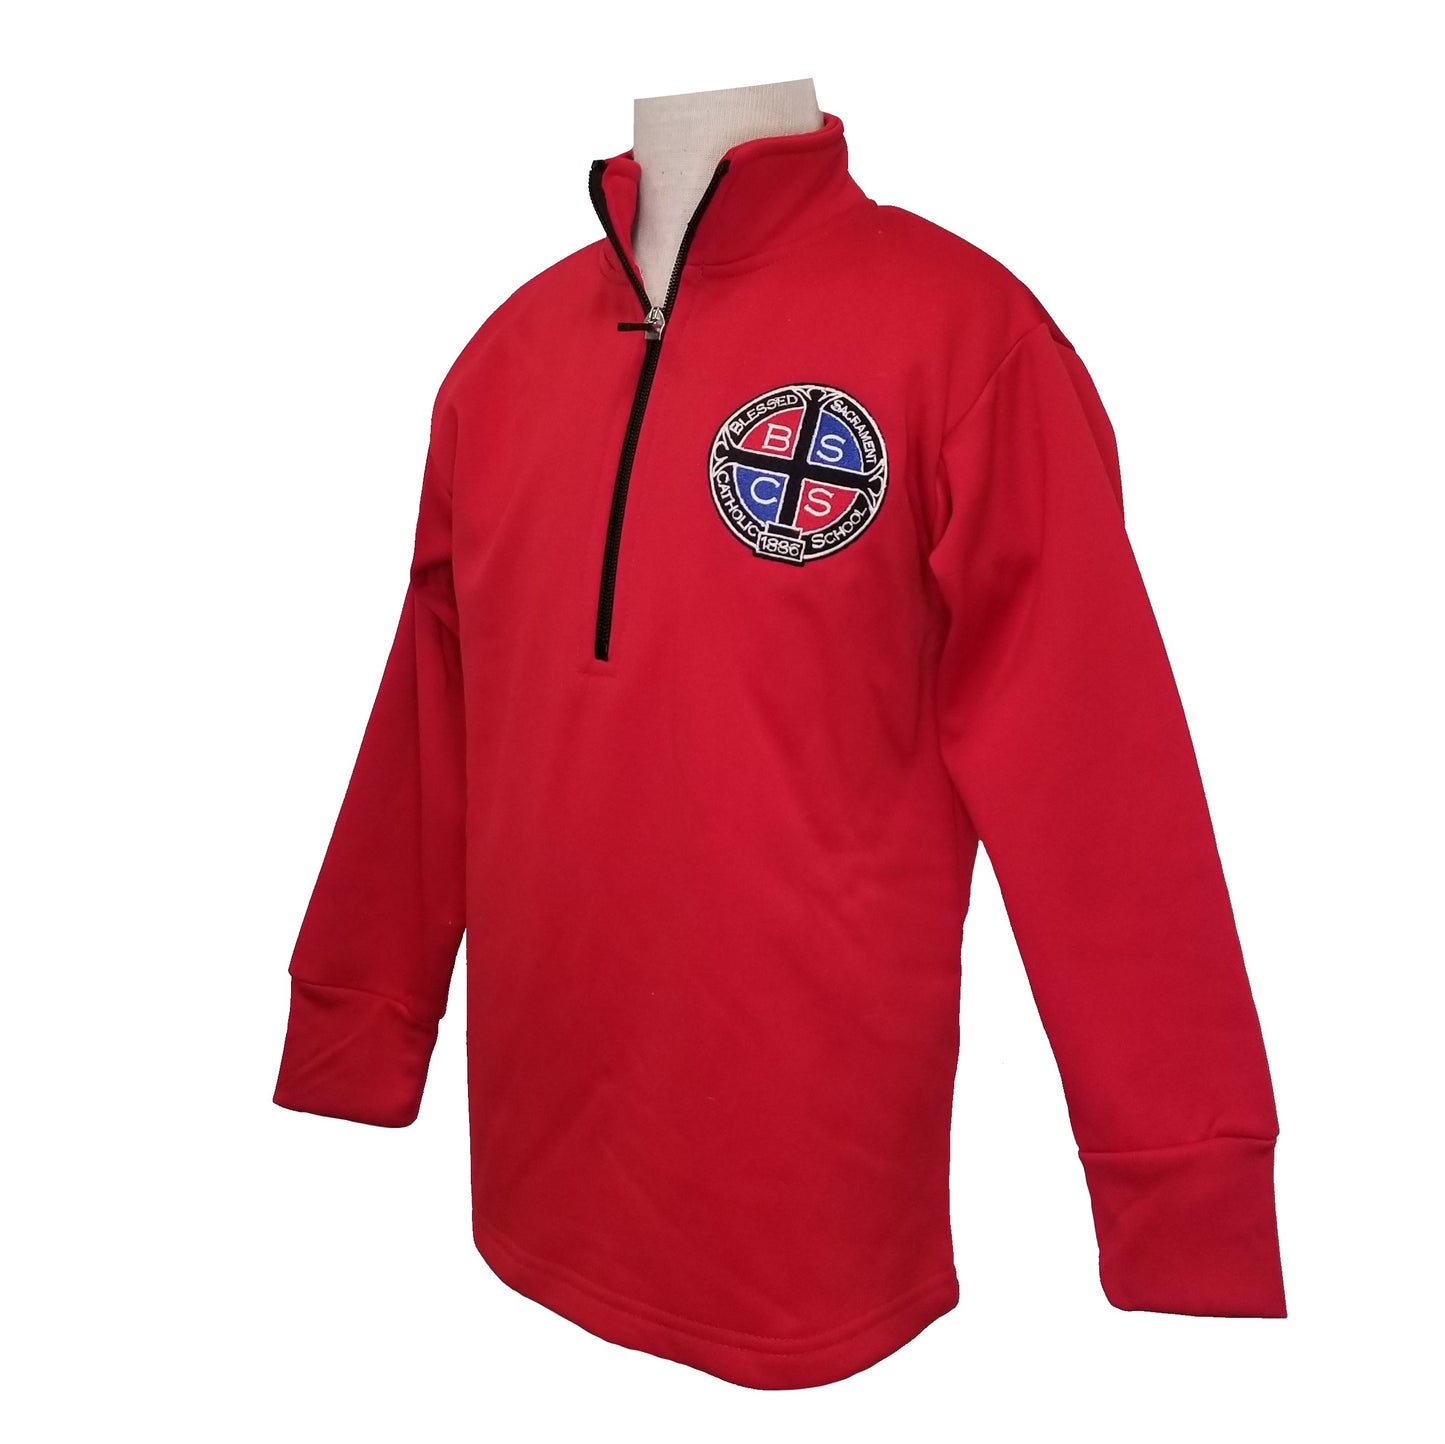 Youth Performance Pullover With Blessed Sacrament Logo